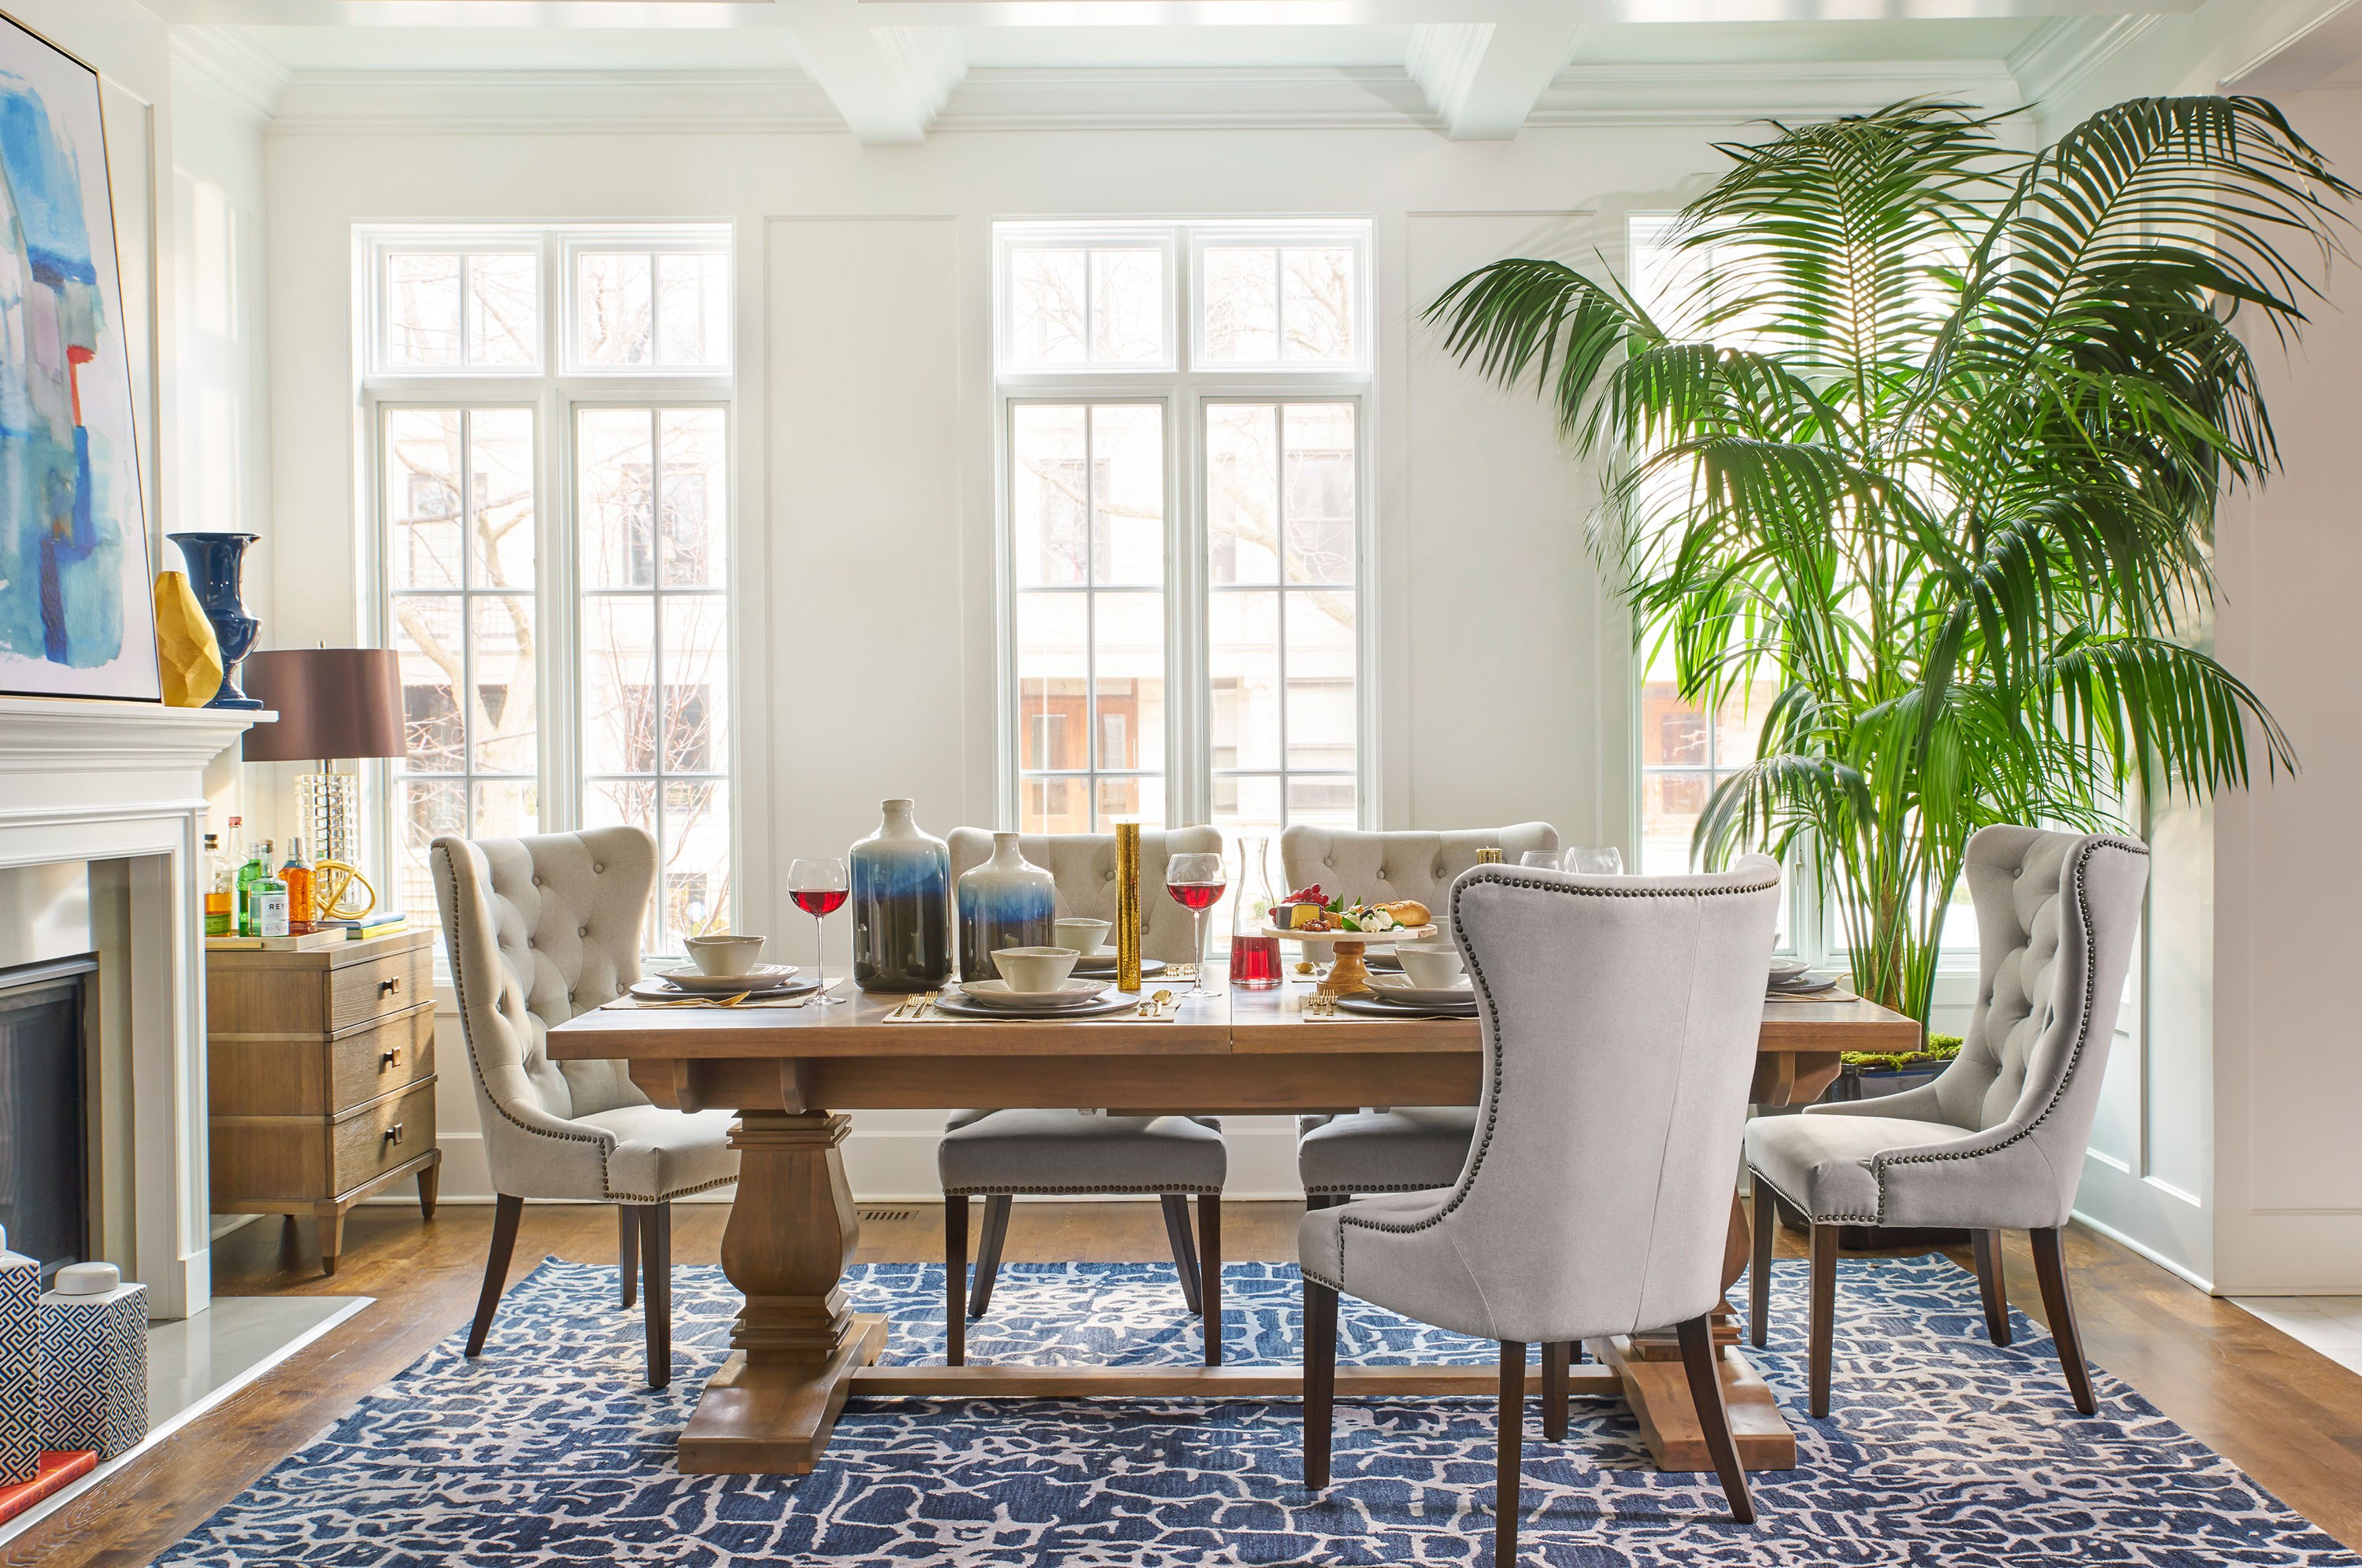 “For a more casual vibe, choose a lighter finish for your dining table and pair it with soft upholstered chairs and a bright patterned rug. I like to accessorize the dining room table and incorporate plants or flowers. As a result, your dining room will look less stuffy and more lived in—in a good way.”